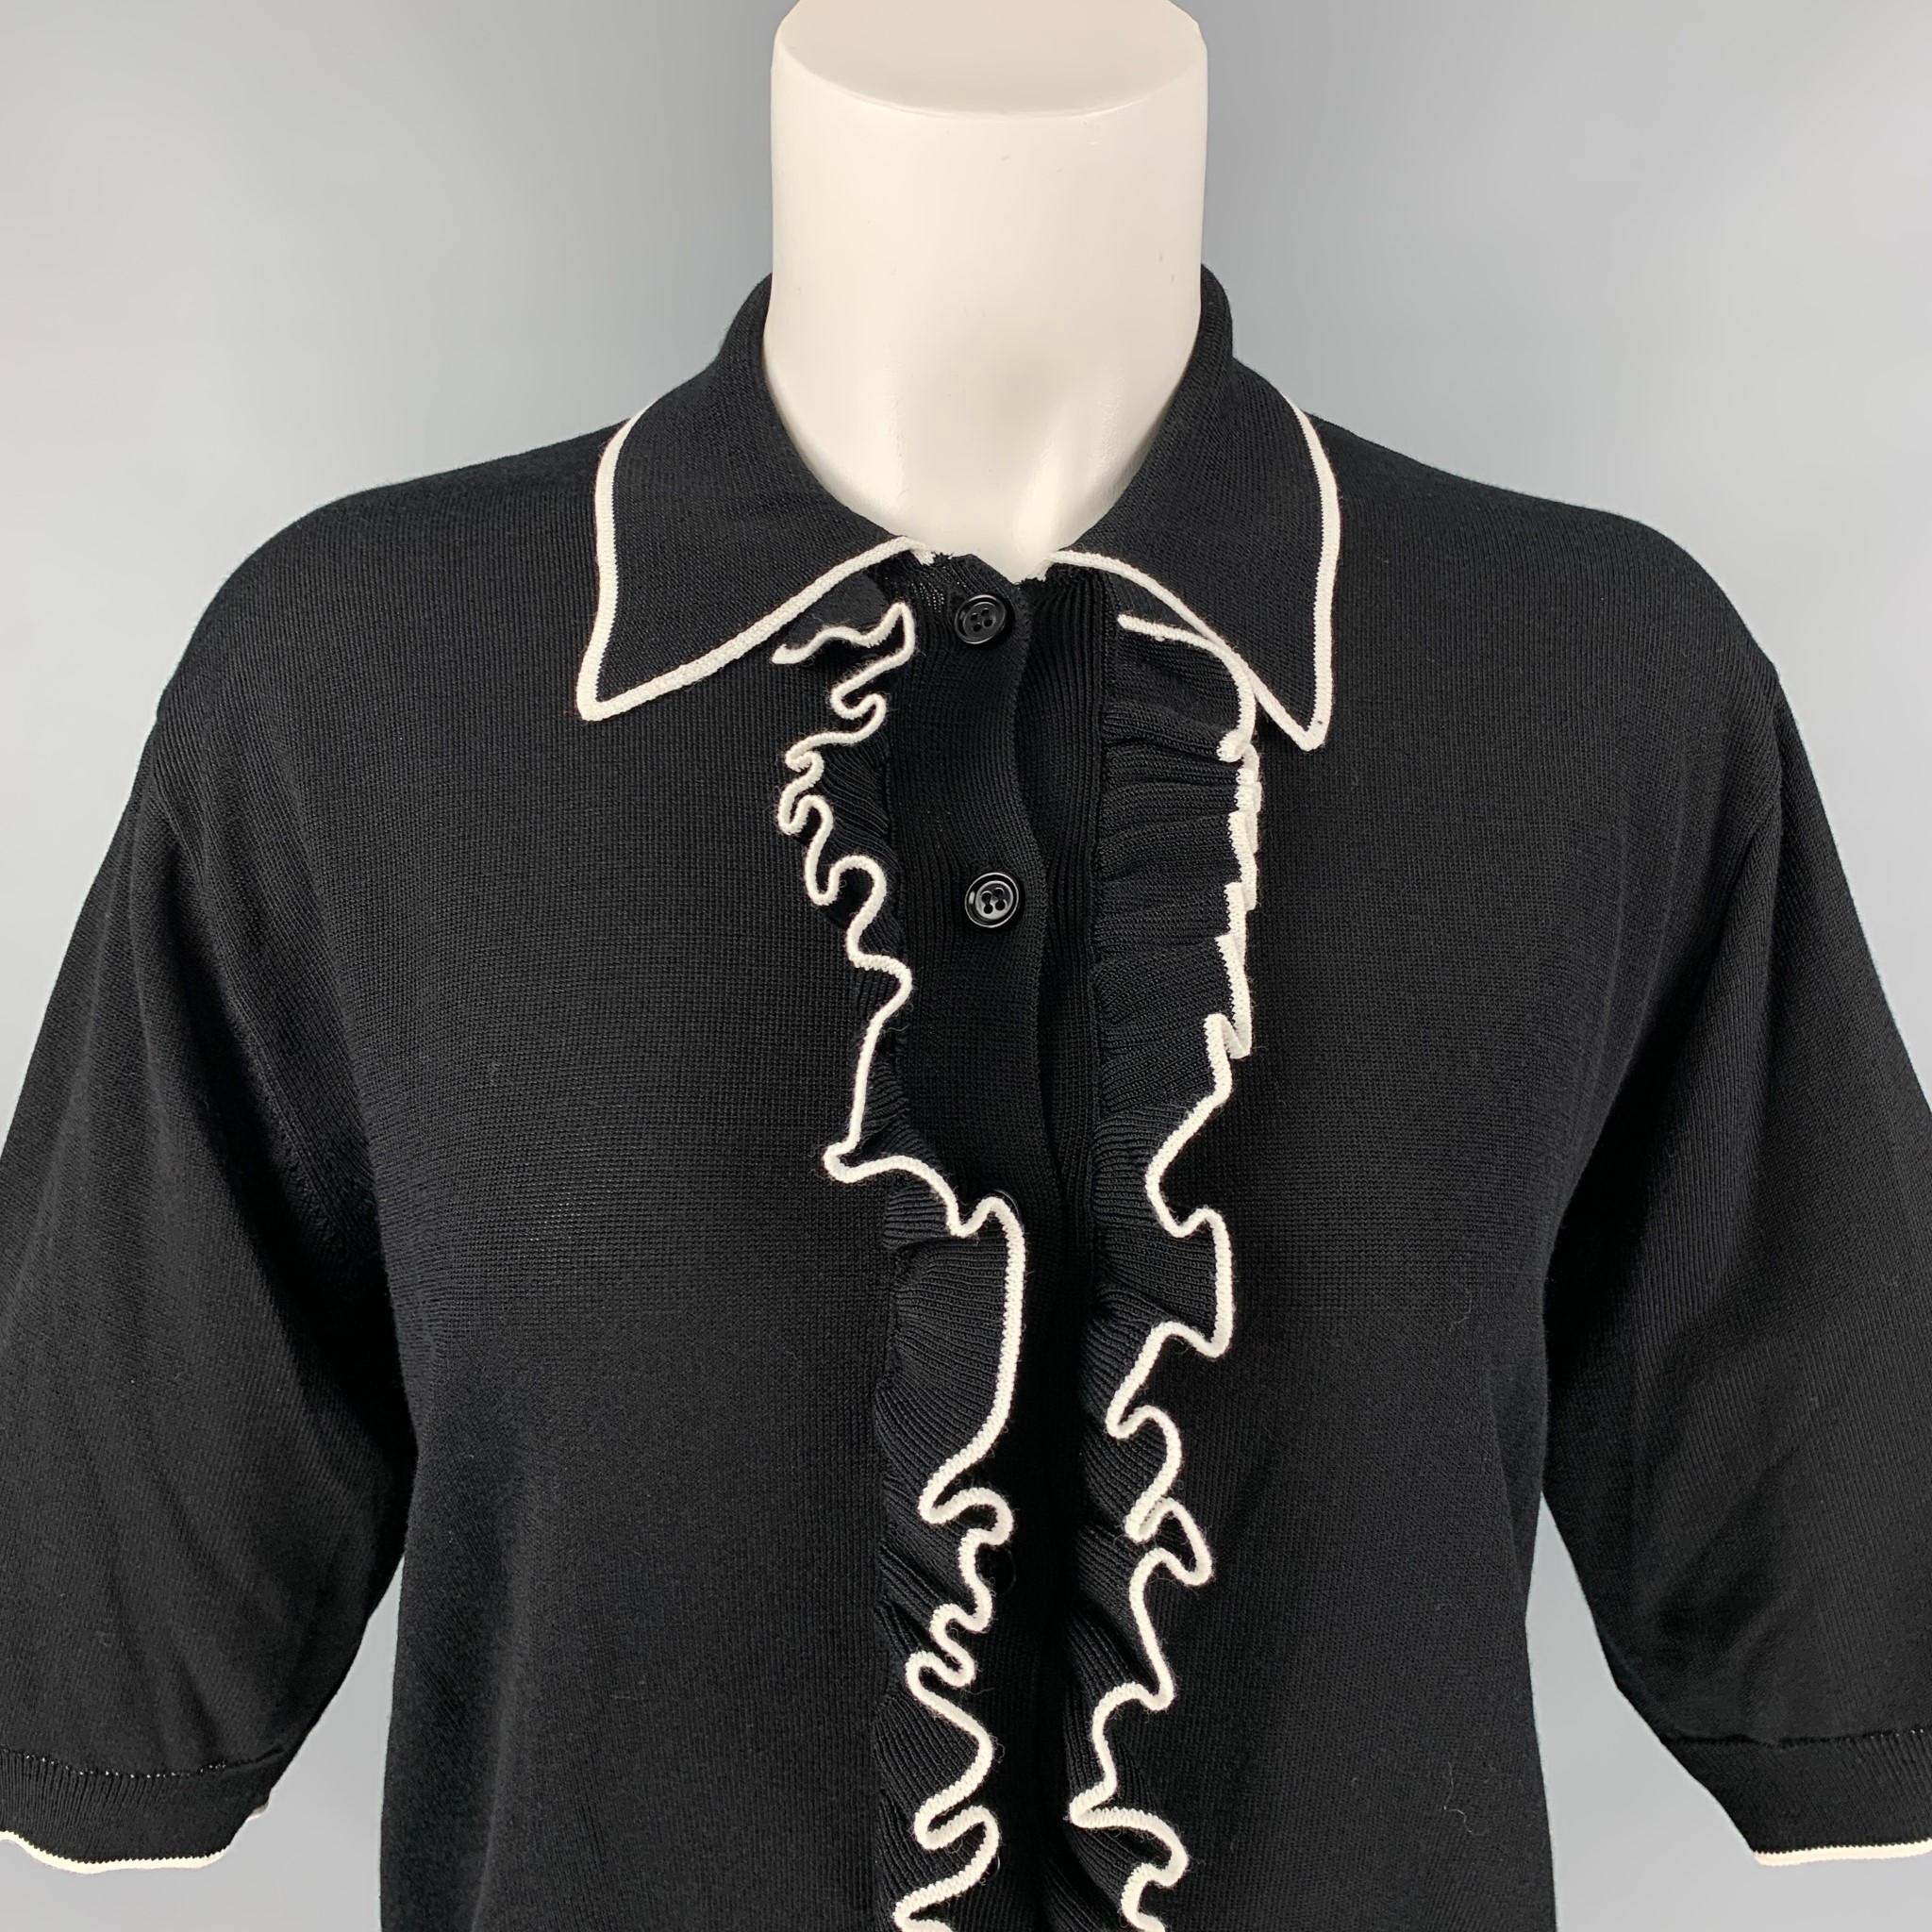 DRIES VAN NOTEN polo shirt comes in a black & white viscose / cotton featuring a ruffled trim, pointed collar, and a buttoned closure. 

Excellent Pre-Owned Condition.
Marked: S

Measurements:

Shoulder: 17 in.
Bust: 36 in.
Sleeve: 12 in.
Length: